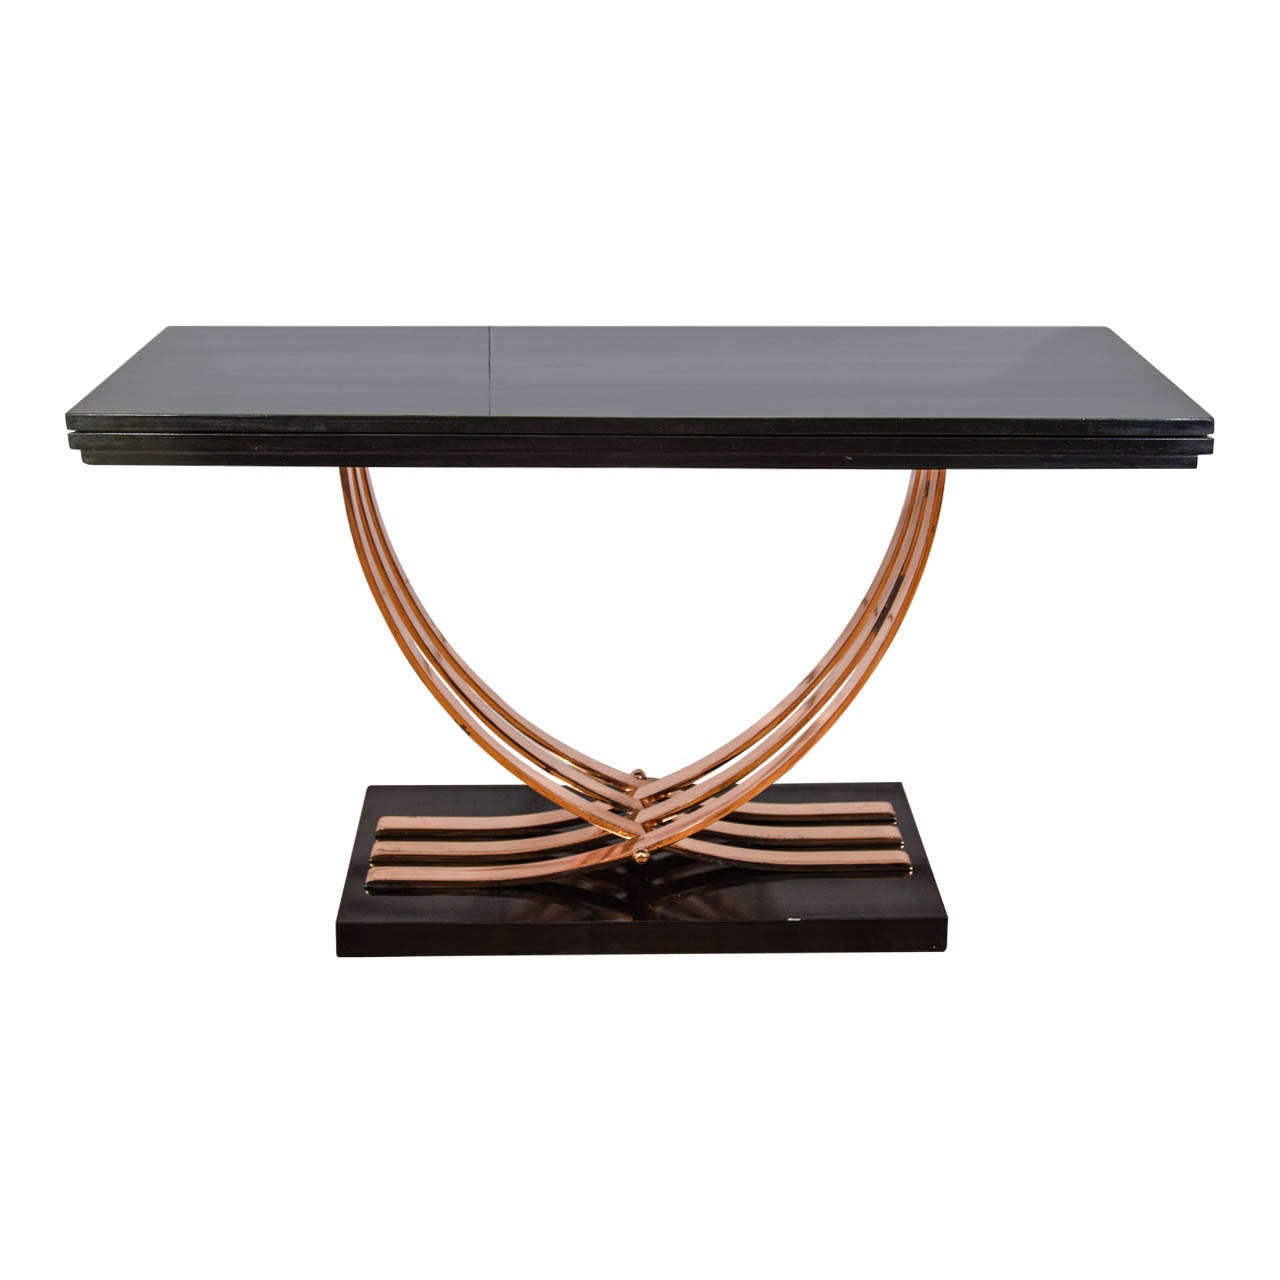  Spectacular Copper Modernist Art Deco Console/Dining Table For Sale